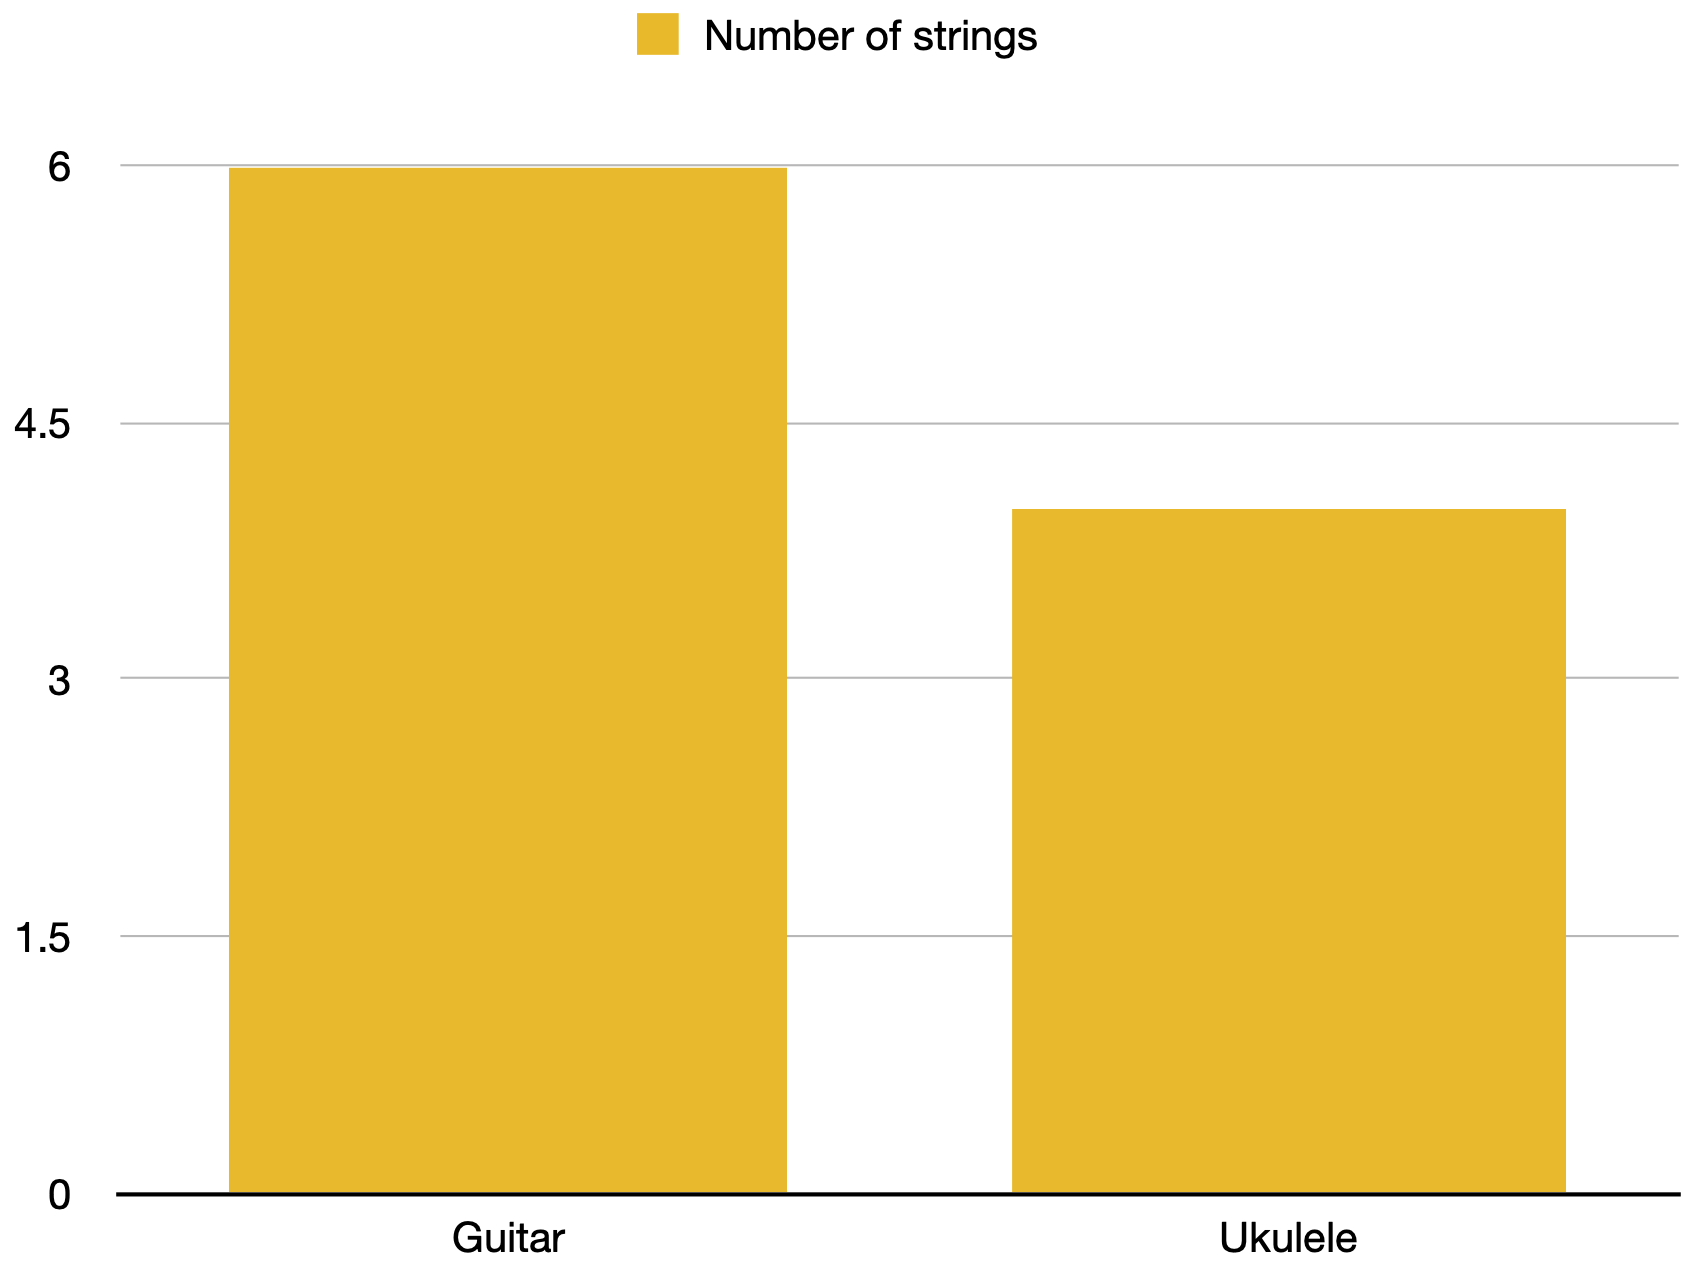 Infographic bar chart showing the different number of strings, comparing guitar to ukulele